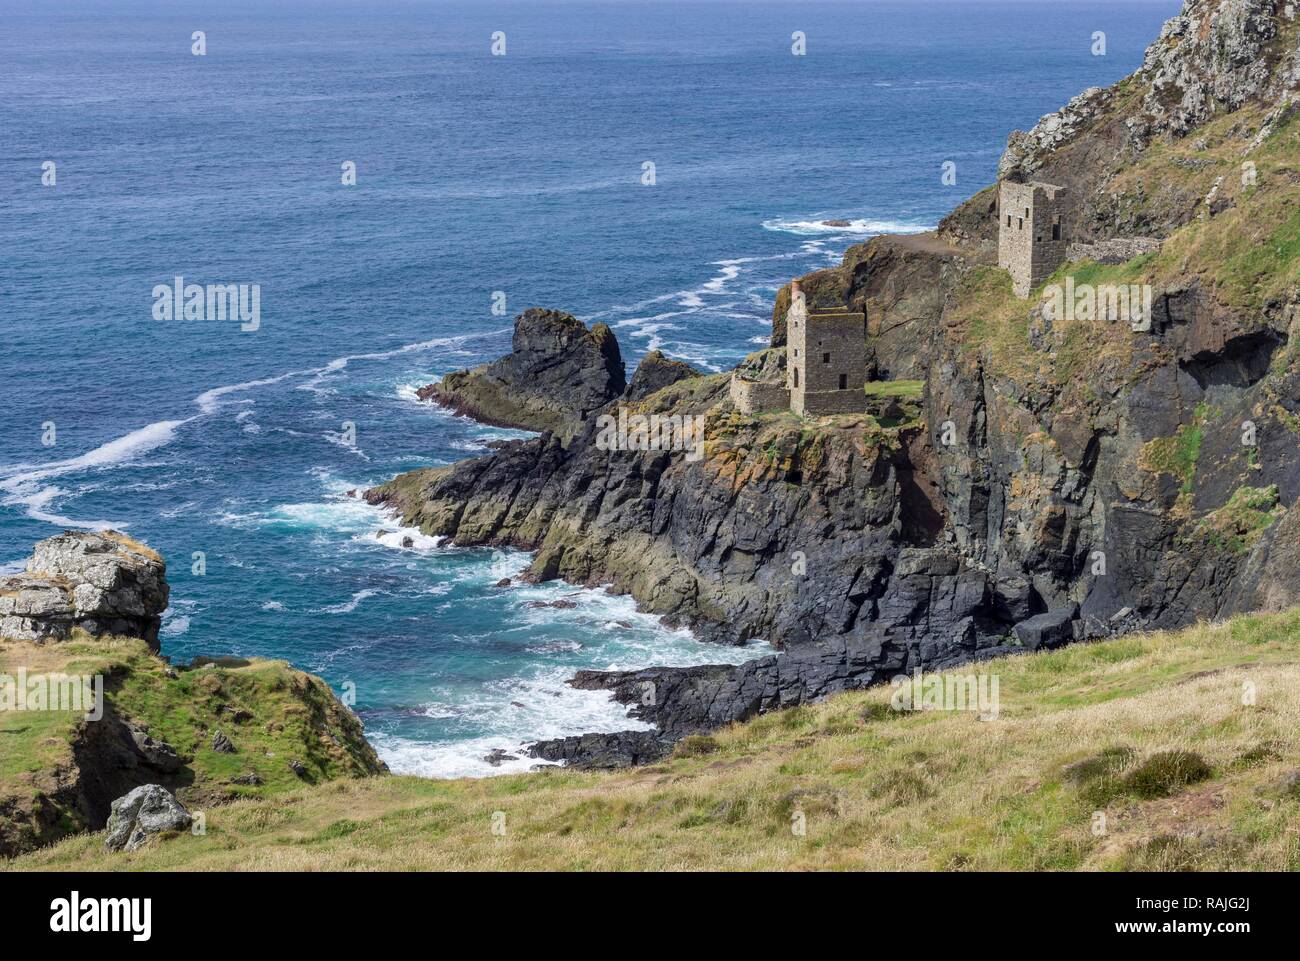 Crowns Engine Houses of the Botallack Mine, St Just in Penwith, Botallack, England, United Kingdom Stock Photo